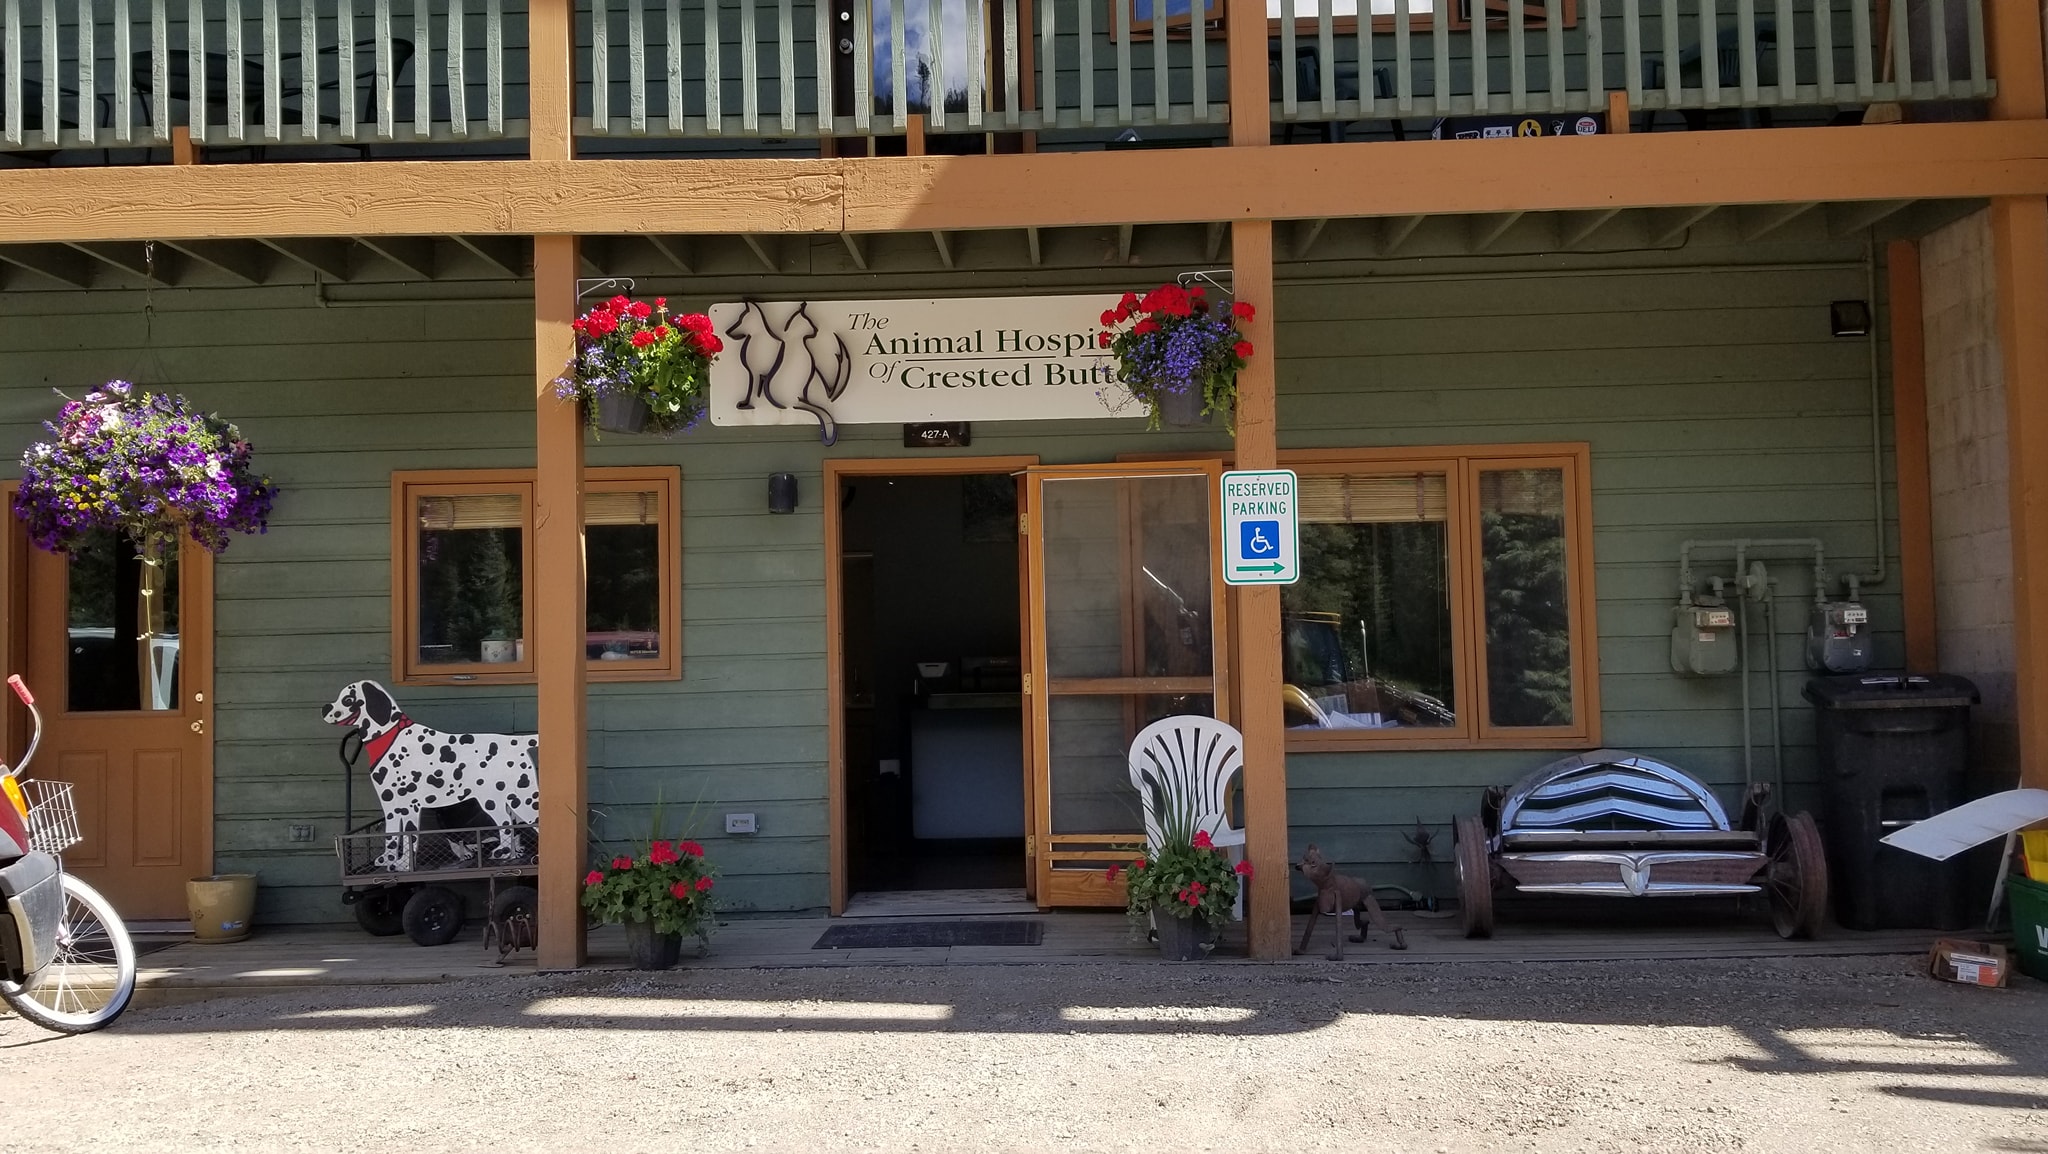 Animal Hospital-Crested Butte 427 Red Lady Ave, Crested Butte Colorado 81224